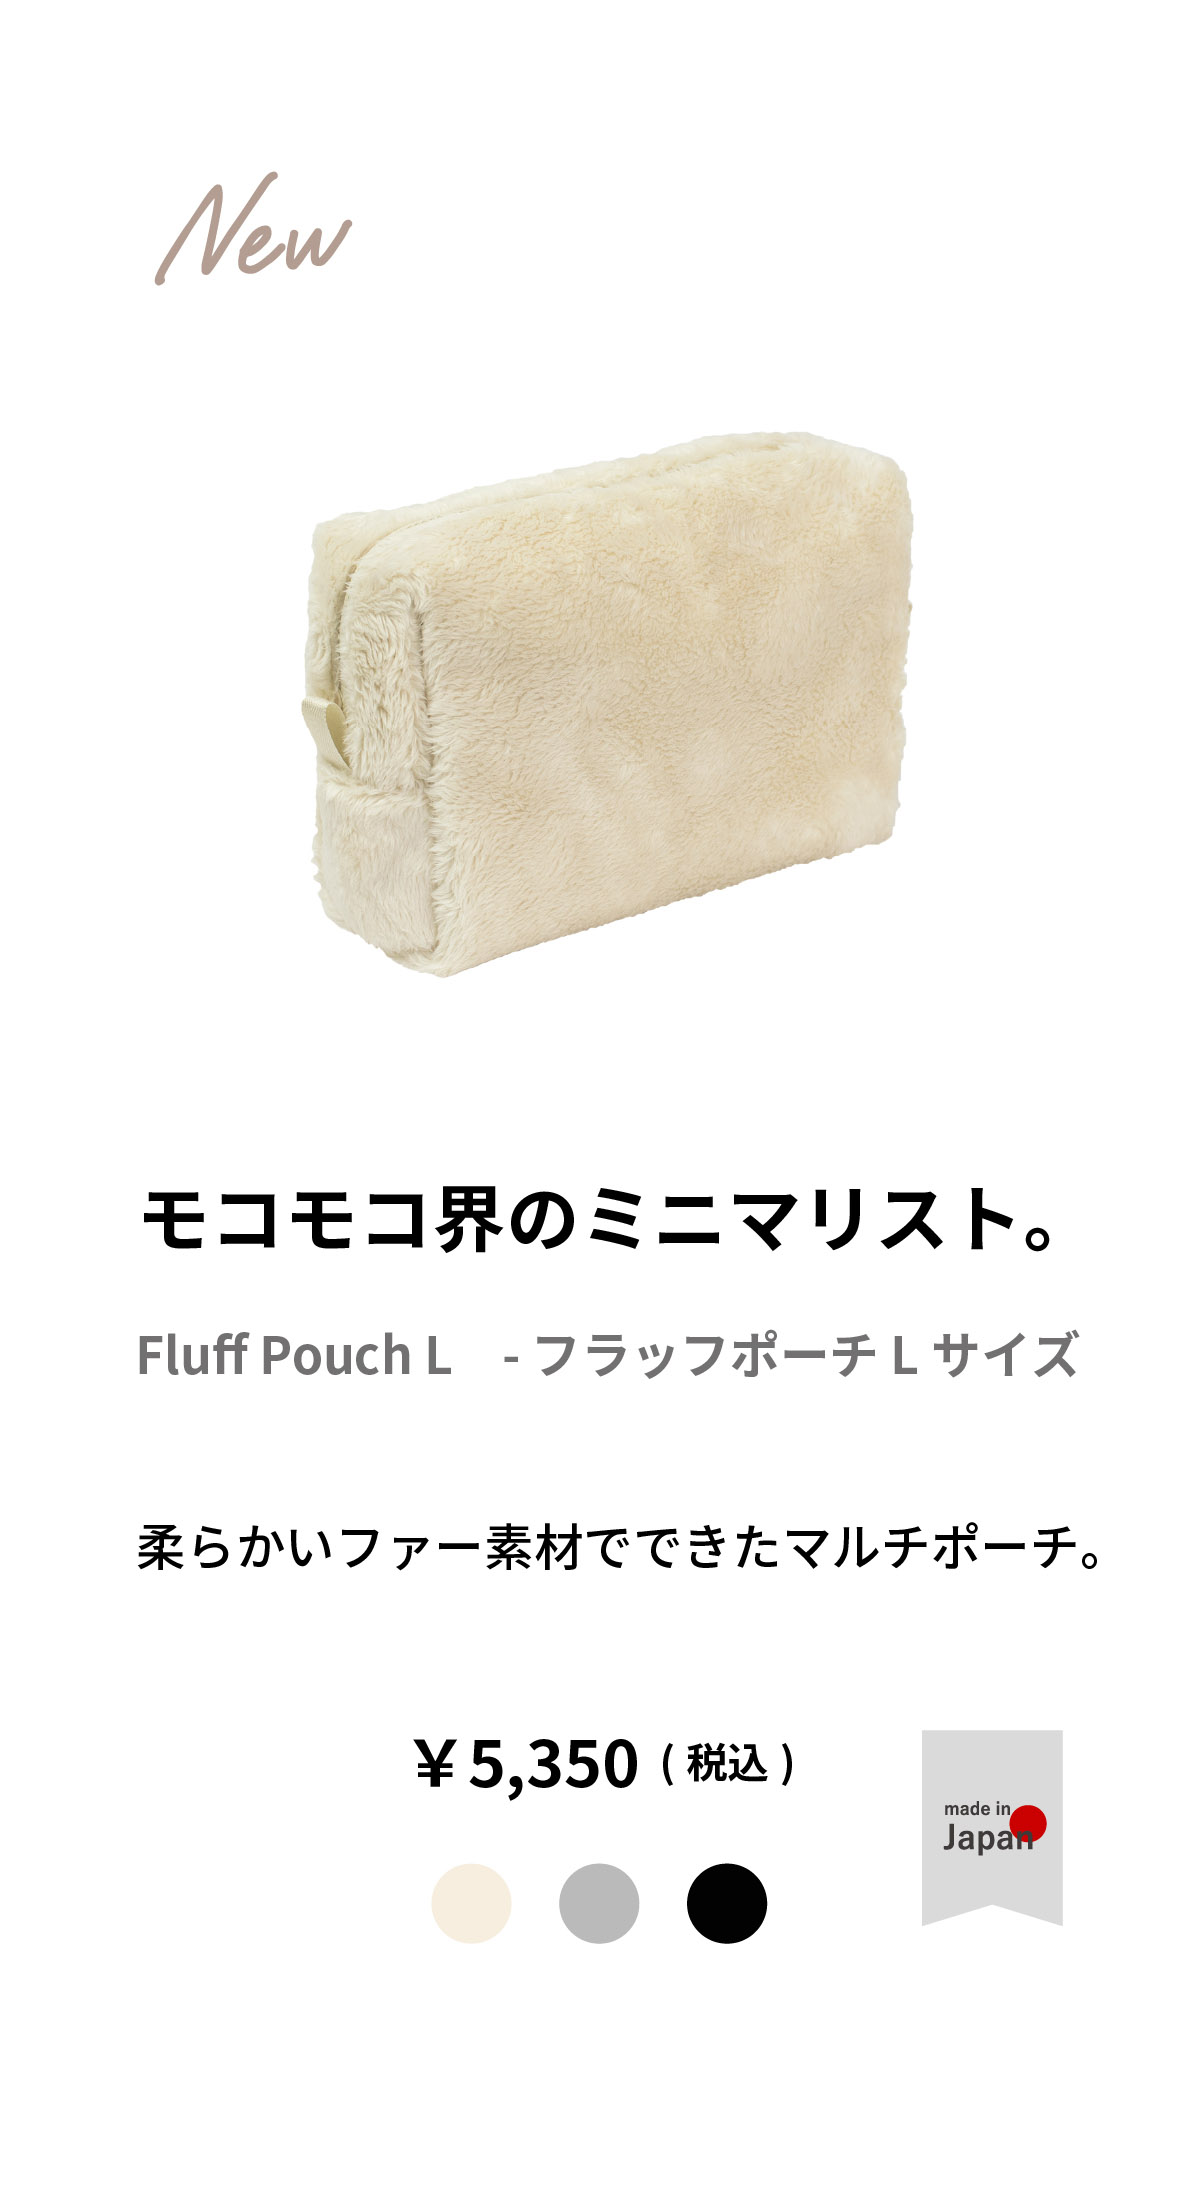 Fluff Pouch（フラッフポーチ）Lサイズ 化粧品 コスメポーチ メンズ 小物 ガジェット 送料無料 新生活 ギフト プレゼント プチギフト｜asoboze｜03